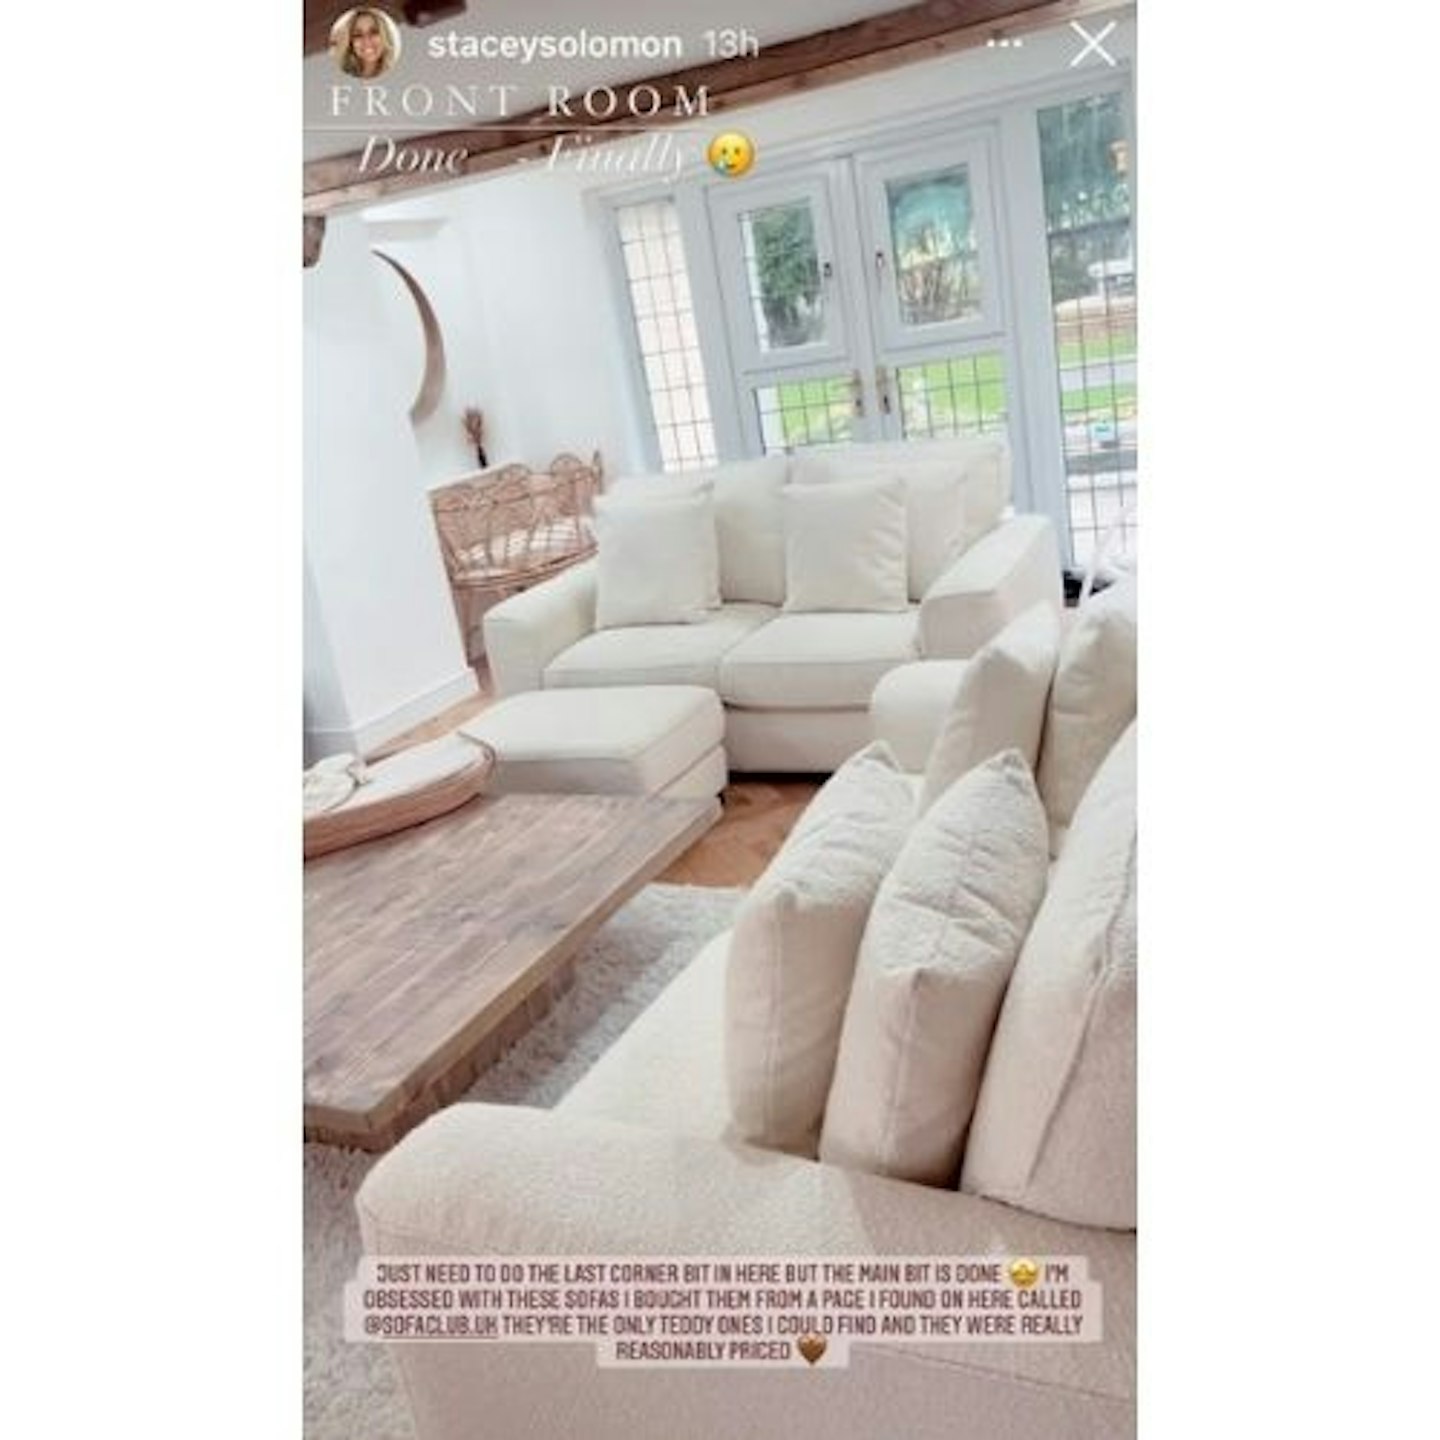 Stacey Solomon's Instagram: Her new front room with the new teddy sofa